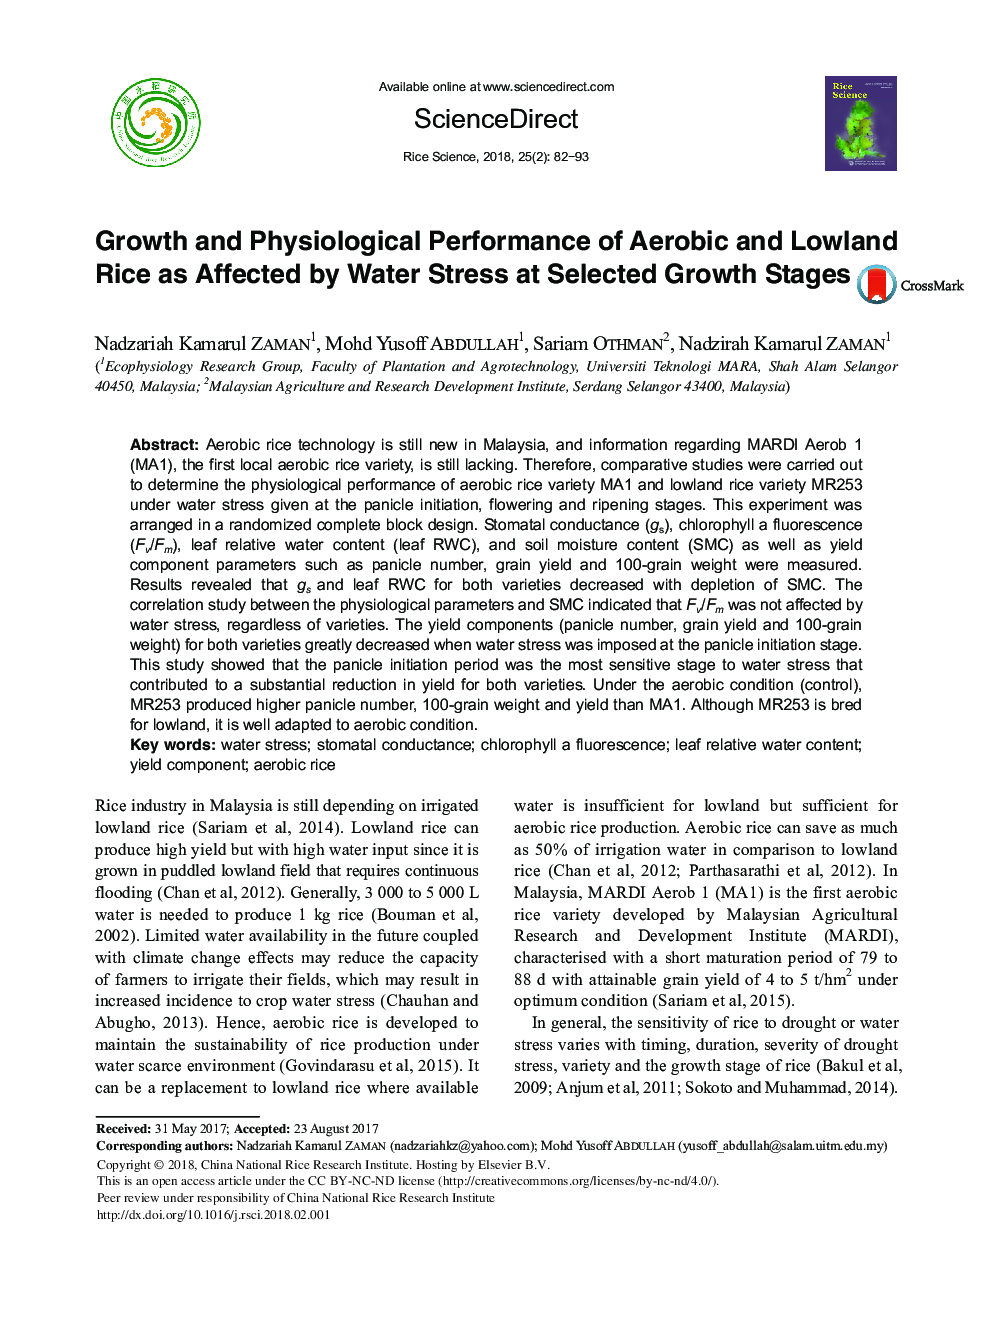 Growth and Physiological Performance of Aerobic and Lowland Rice as Affected by Water Stress at Selected Growth Stages